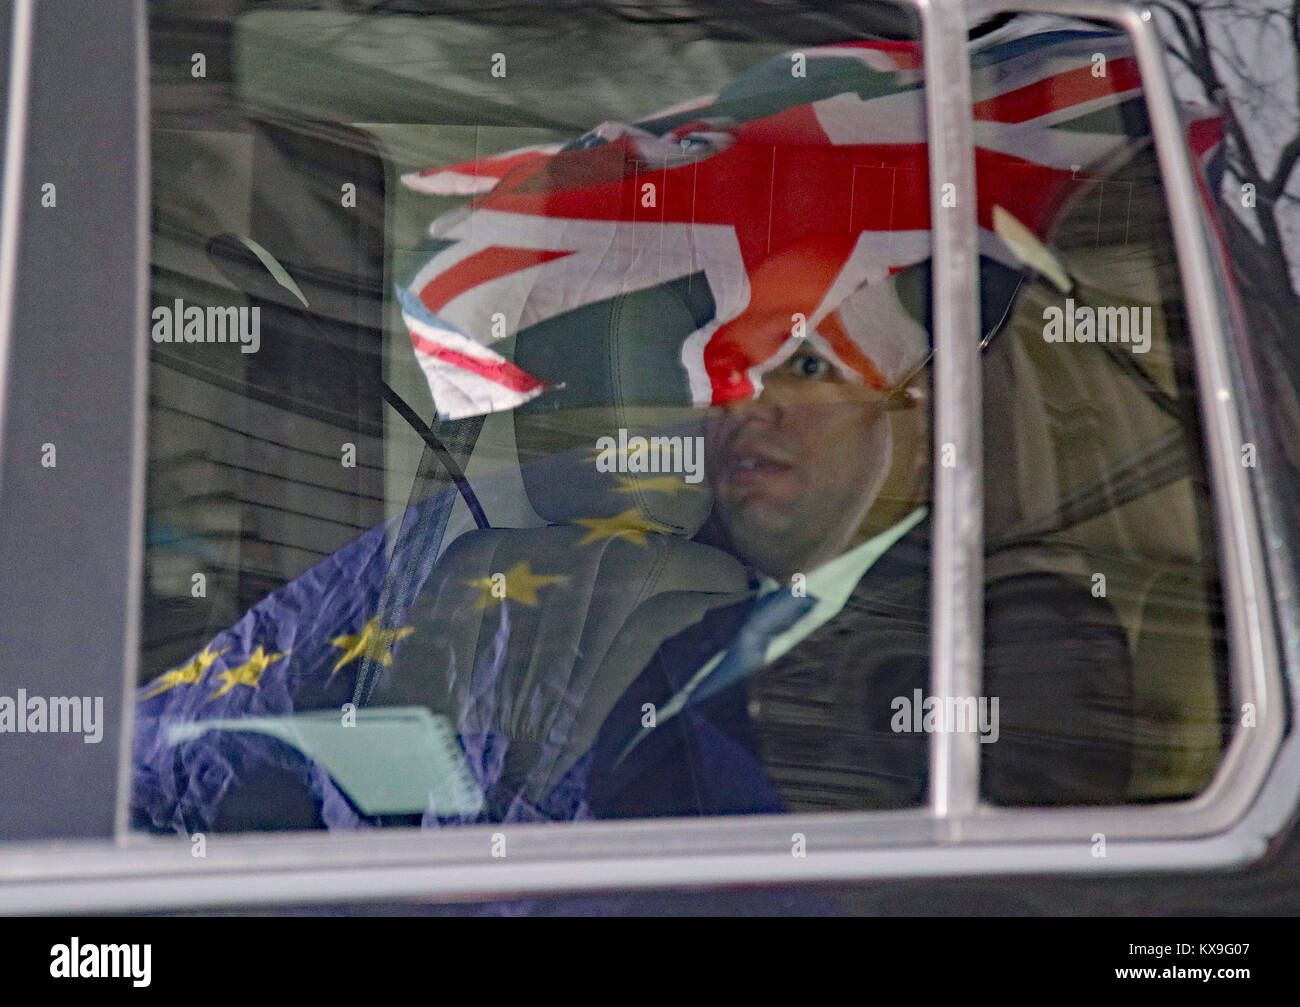 The Union flag and the EU flag are reflected in the window of the car carrying Communities Secretary Sajid Javid as he leaves Downing Street, London, where Theresa May is reshuffling her top team. Stock Photo